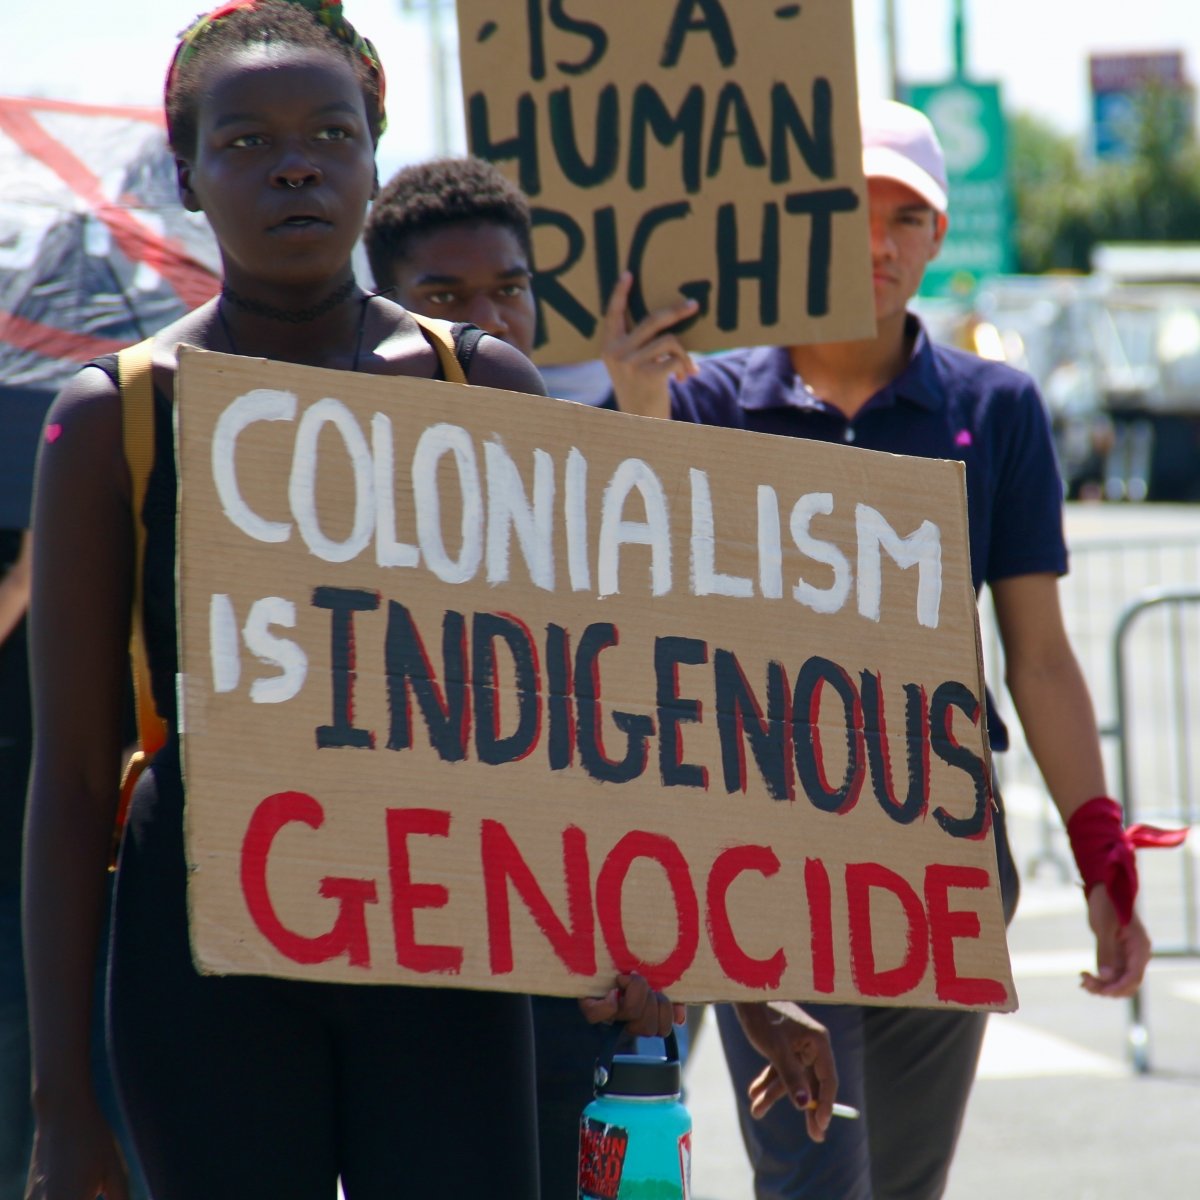 Colonialism is genocide